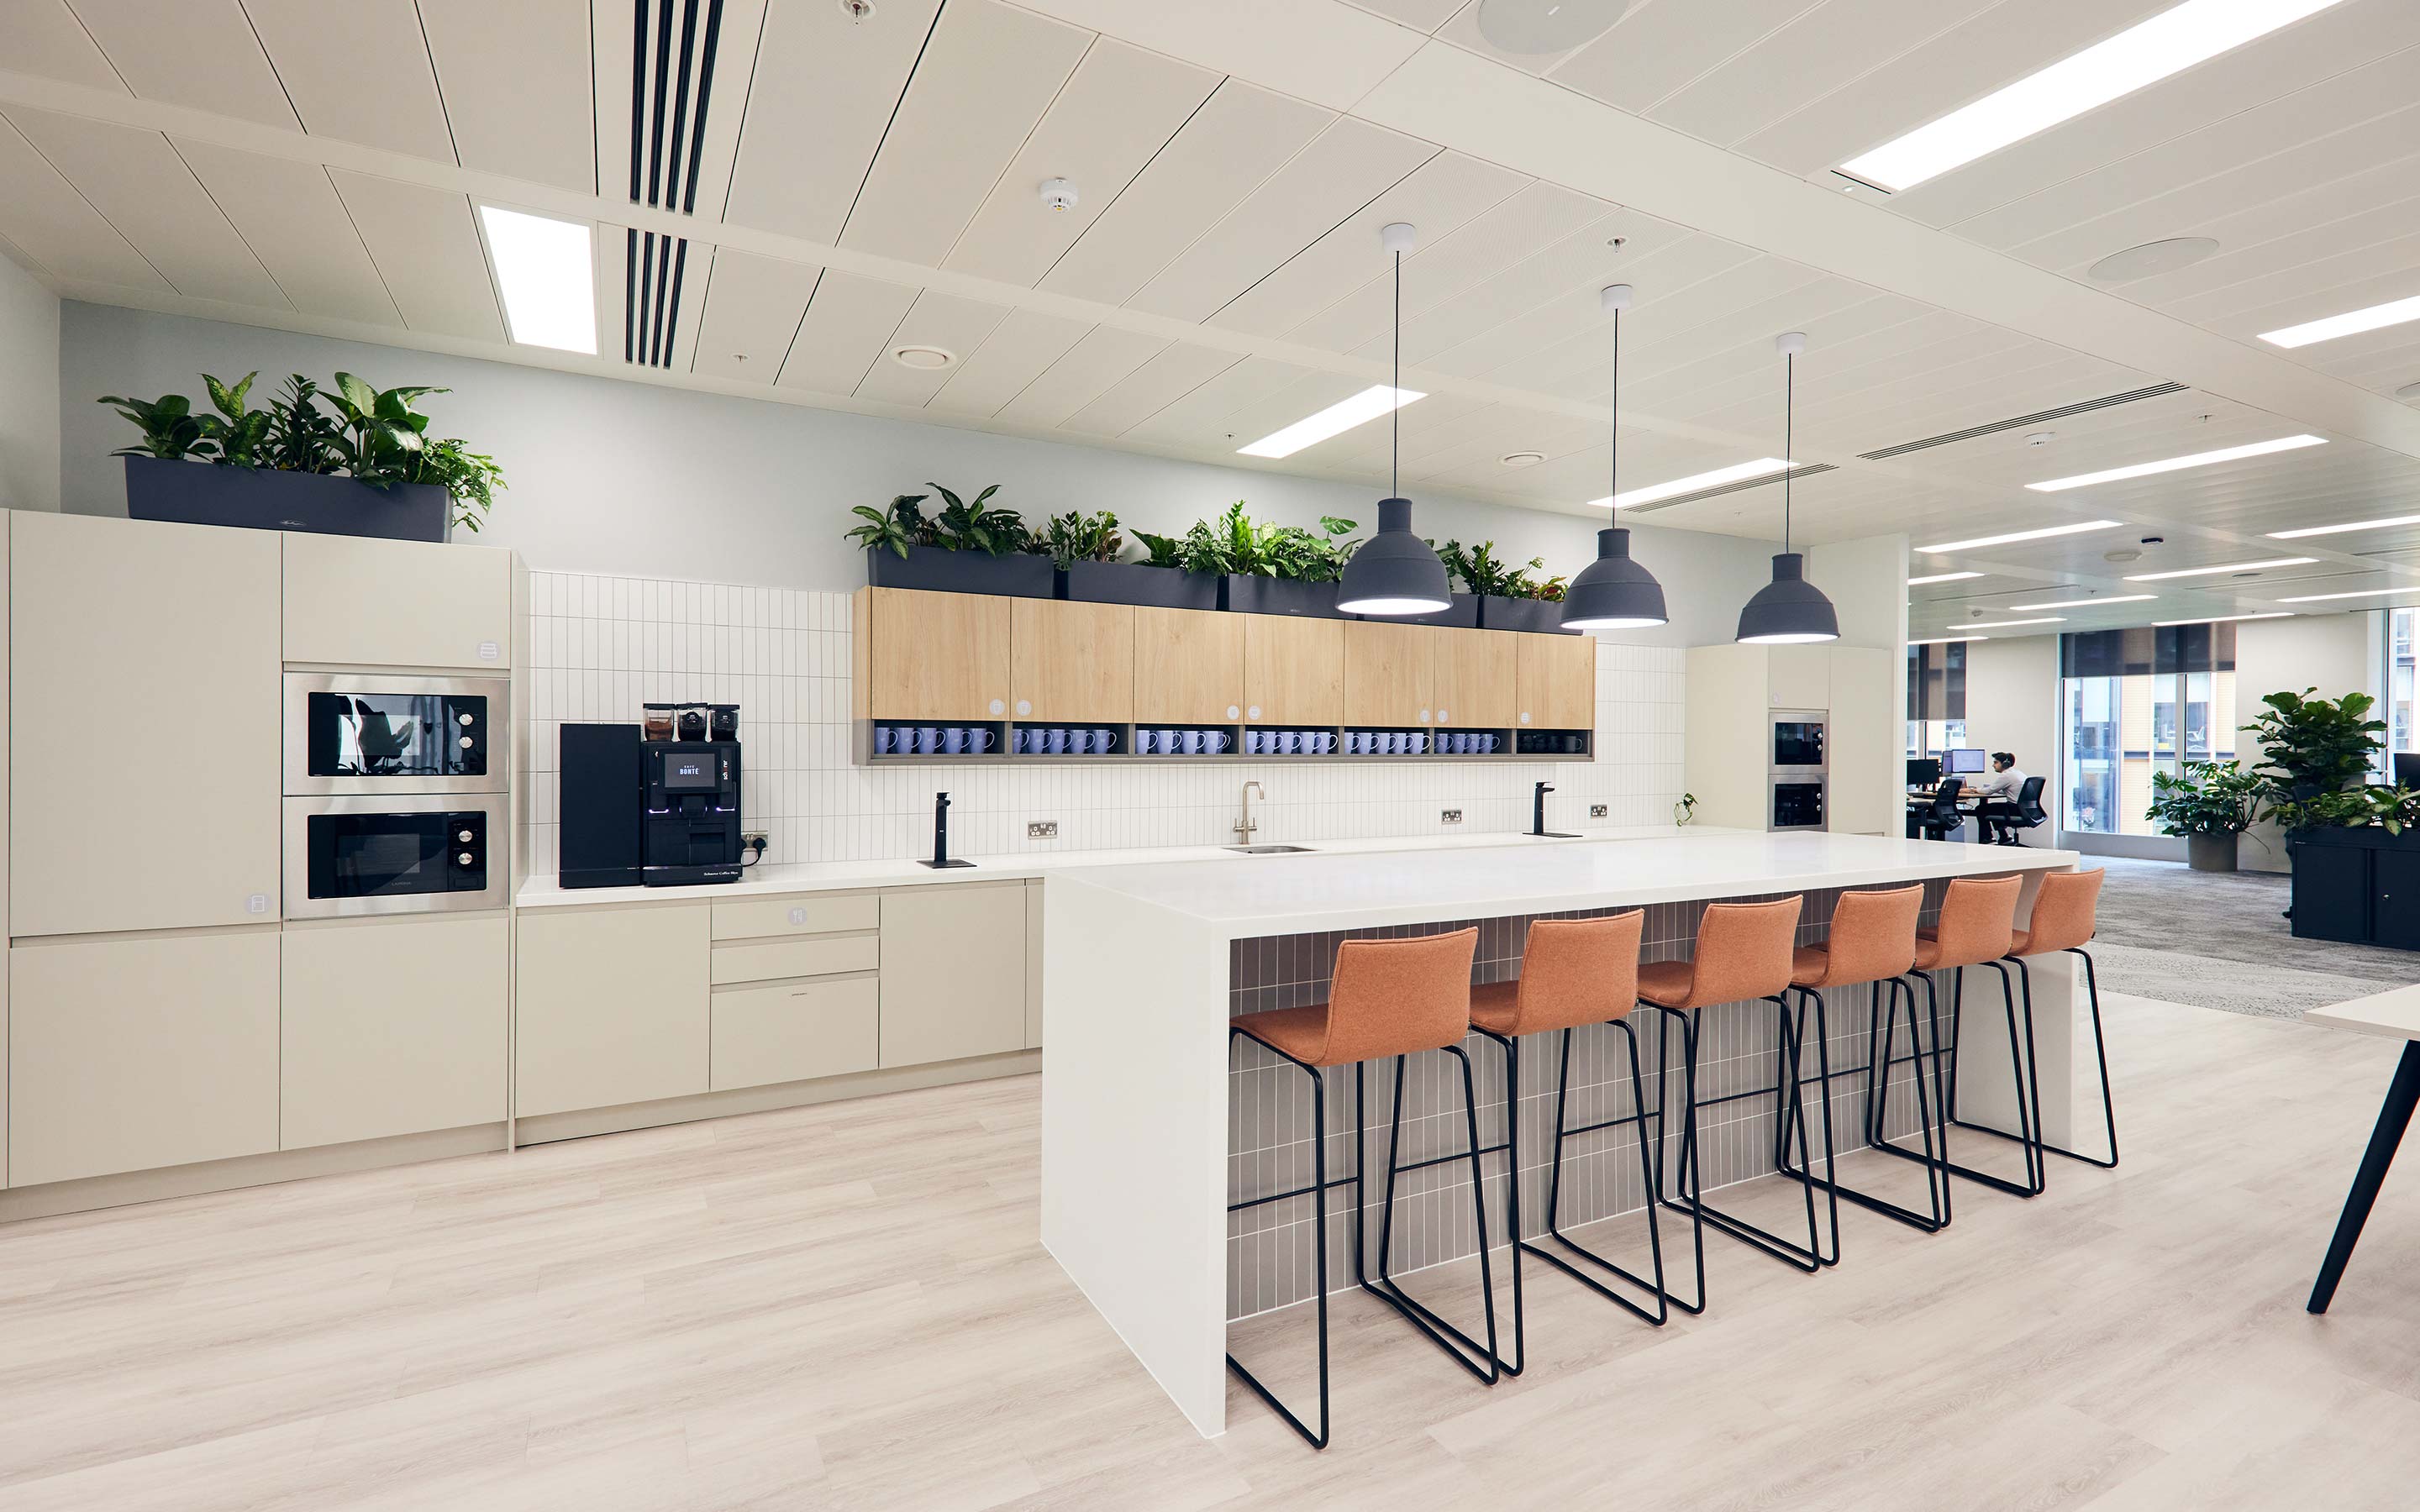 An office teapoint features kitchen facilities complete with salmon pink high breakfast stools, and views of the open plan office